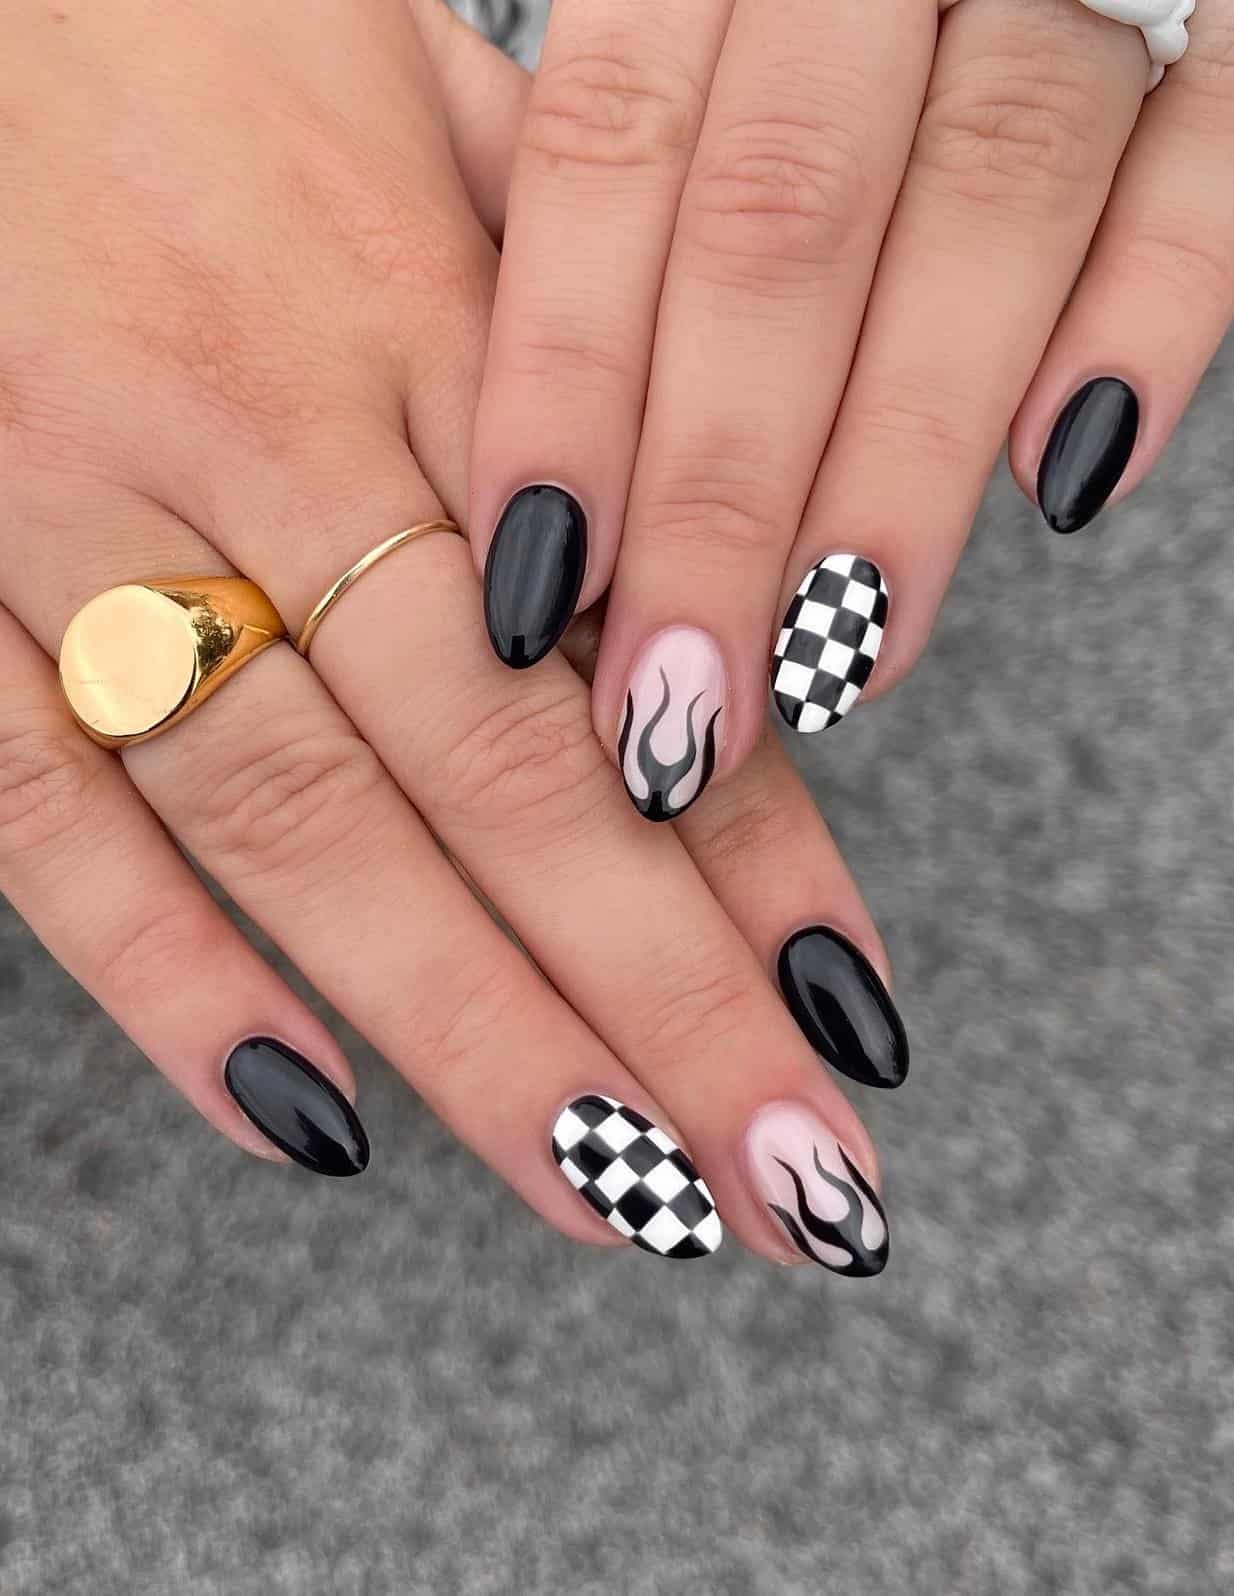 Short almond nails with solid-colored black nails, black flame nails, and white and black checkered nails